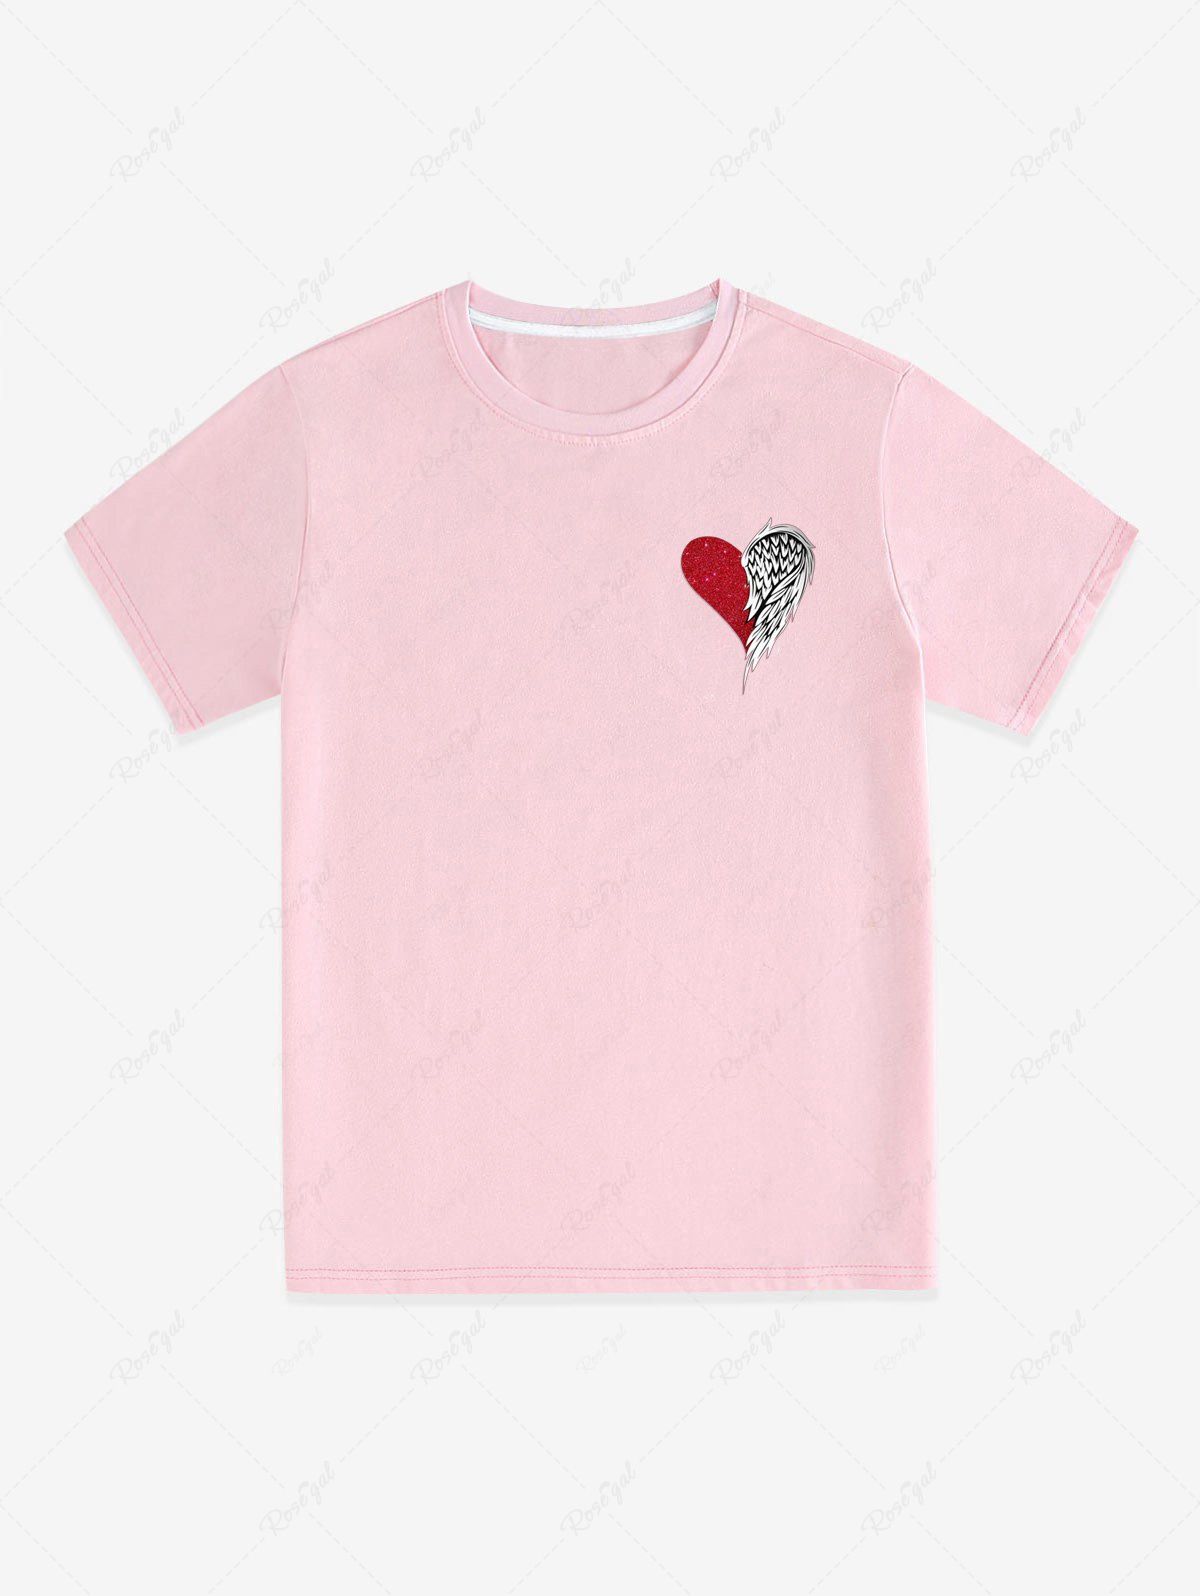 New Heart Wing Print Solid Unisex T Shirt  